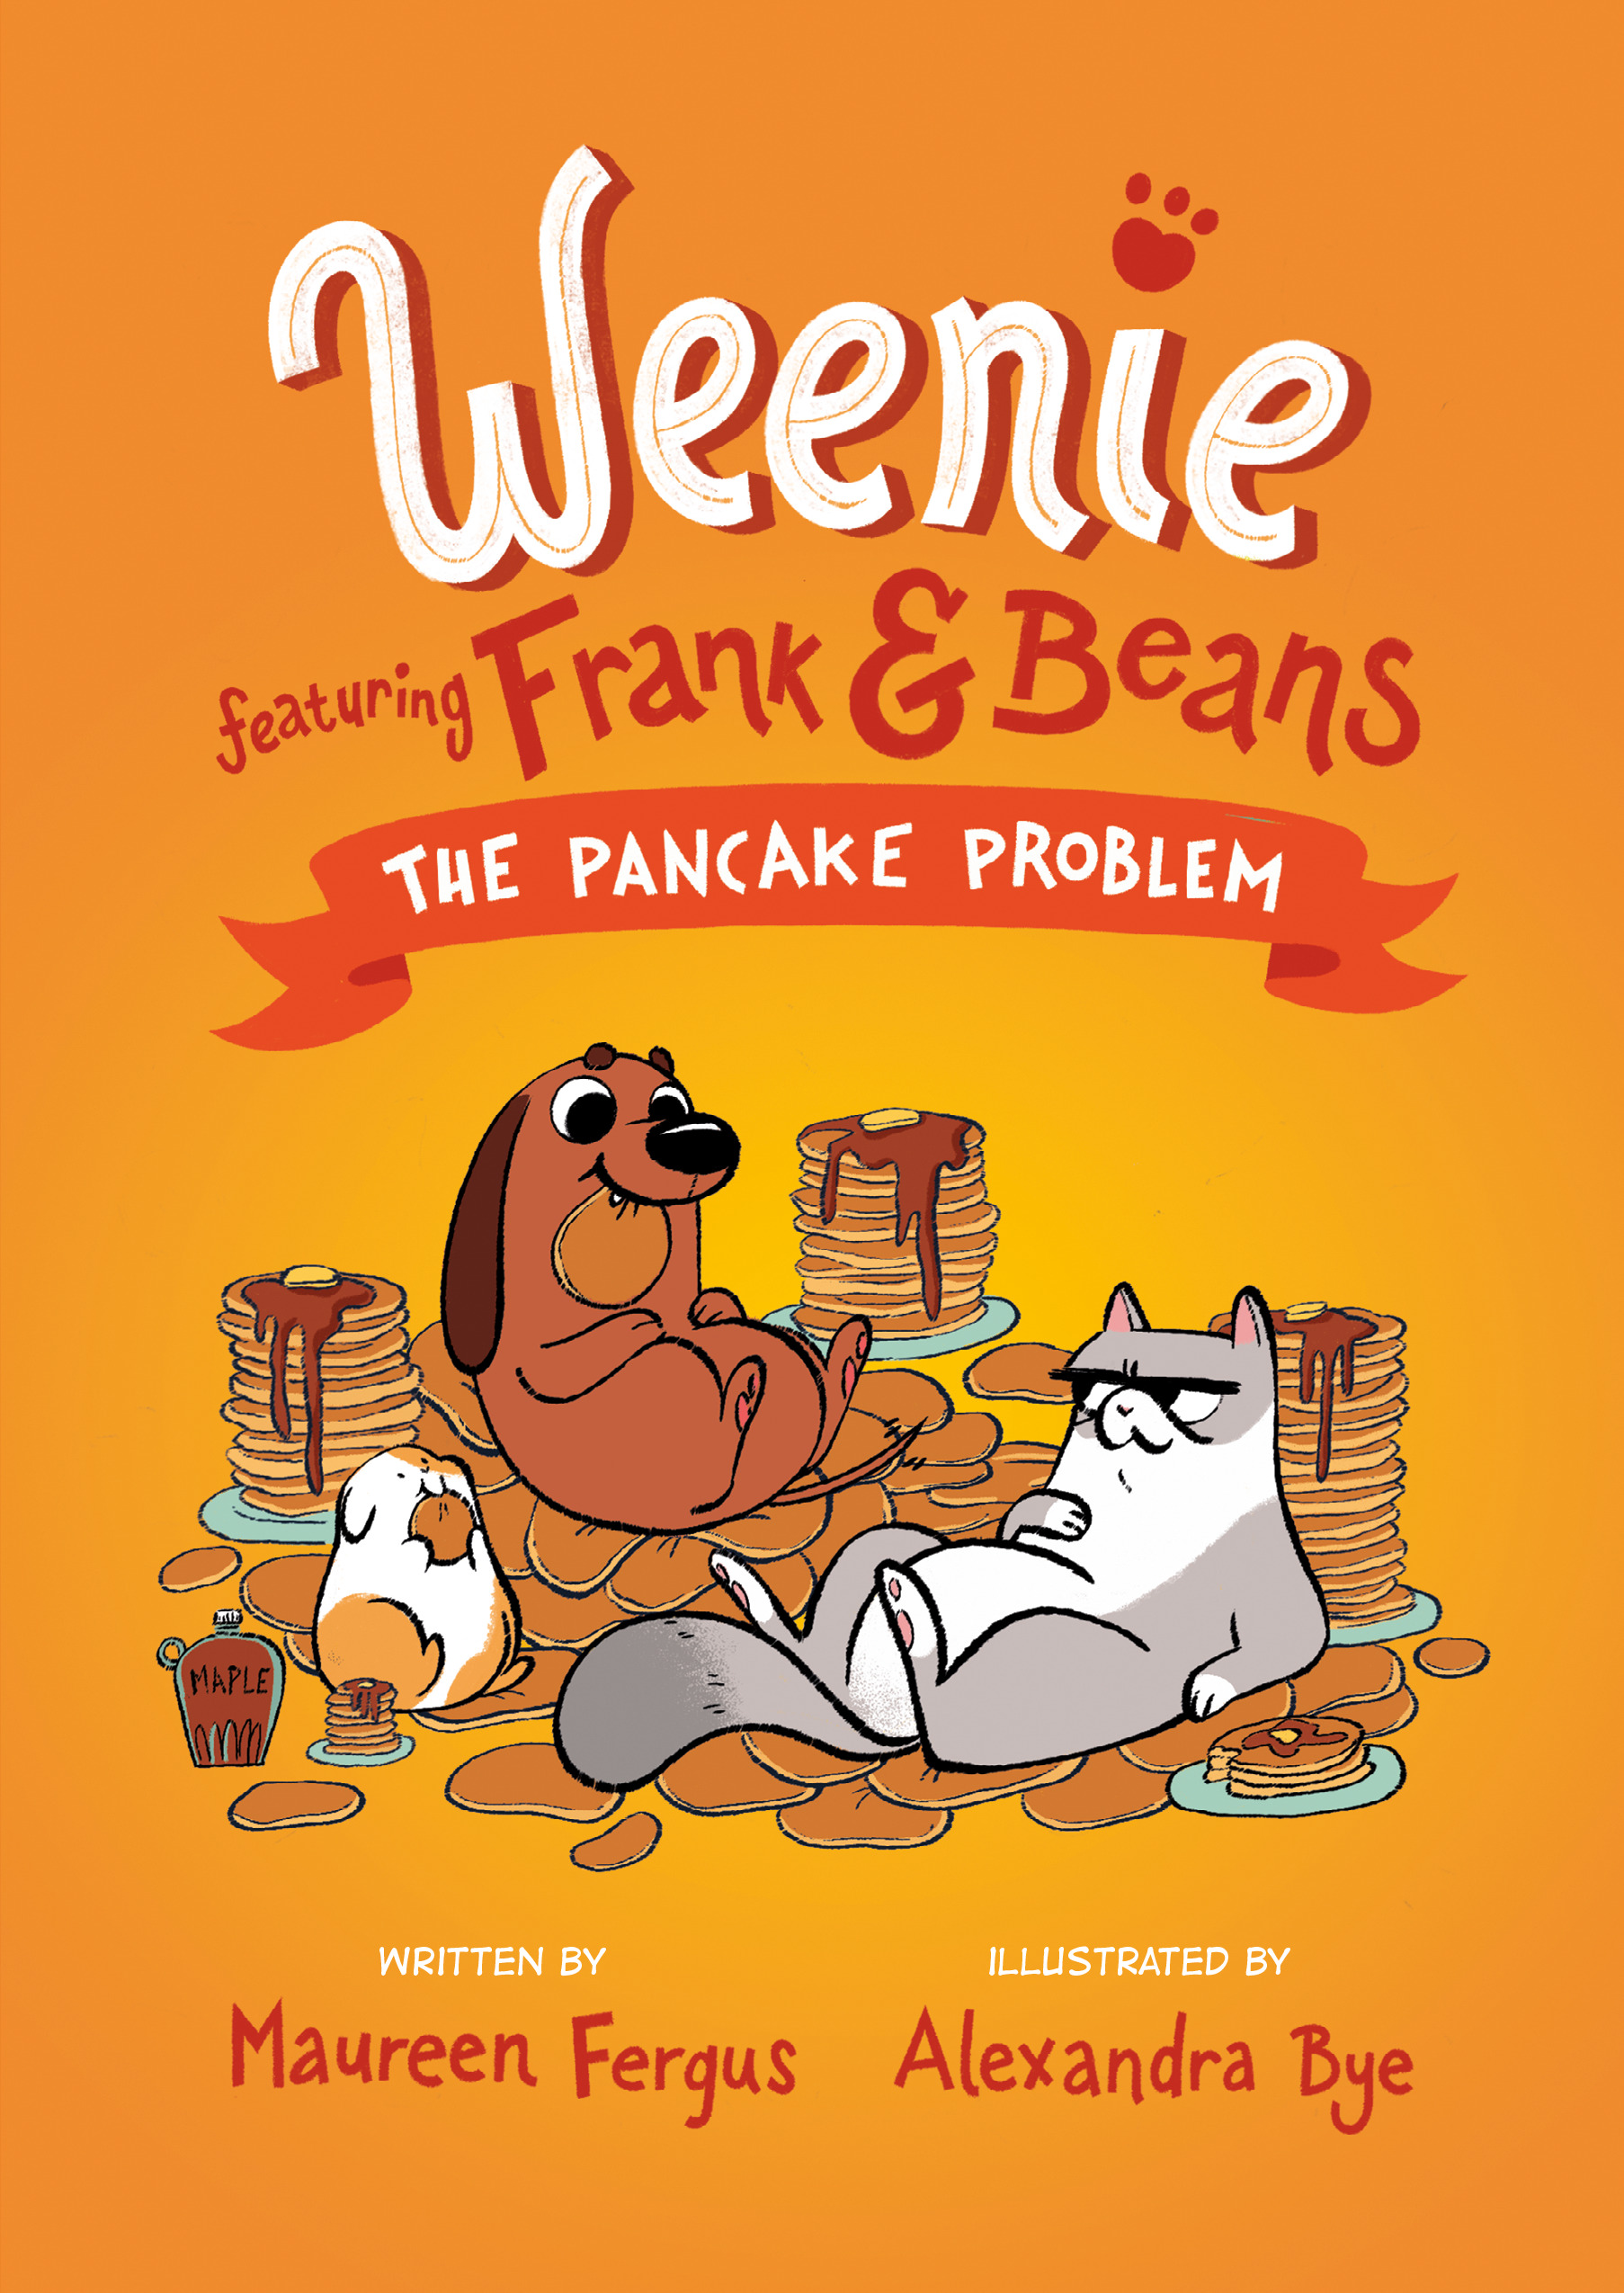 The Pancake Problem (Weenie Featuring Frank and Beans Book #2) | Fergus, Maureen